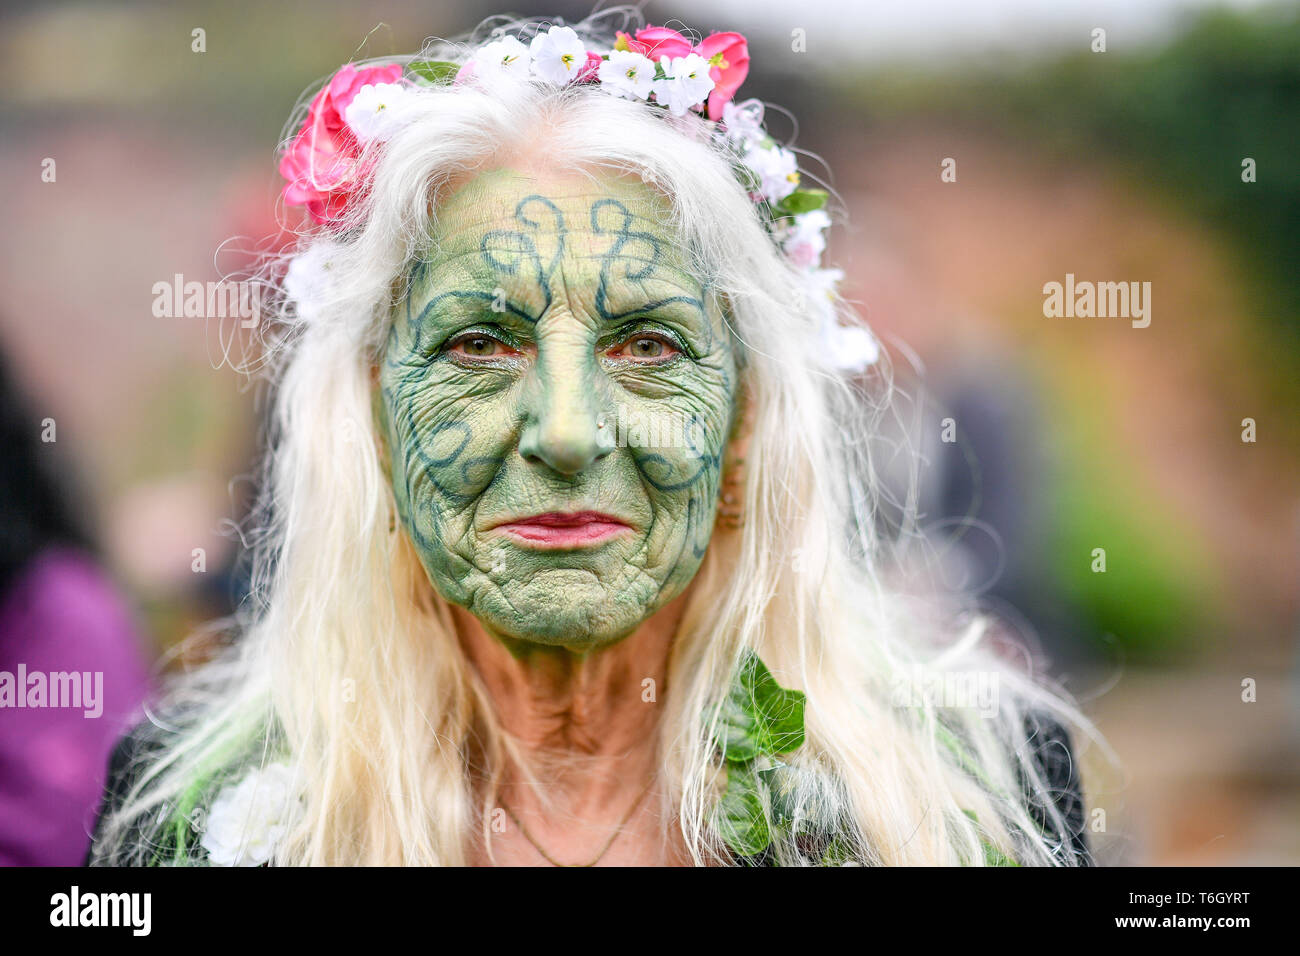 Glastonbury Border Morris Jean Growney wears green face paint during the Beltane celebrations at Glastonbury Chalice Well, where people gather to observe a modern interpretation of the ancient Celtic pagan fertility rite of Spring. Stock Photo